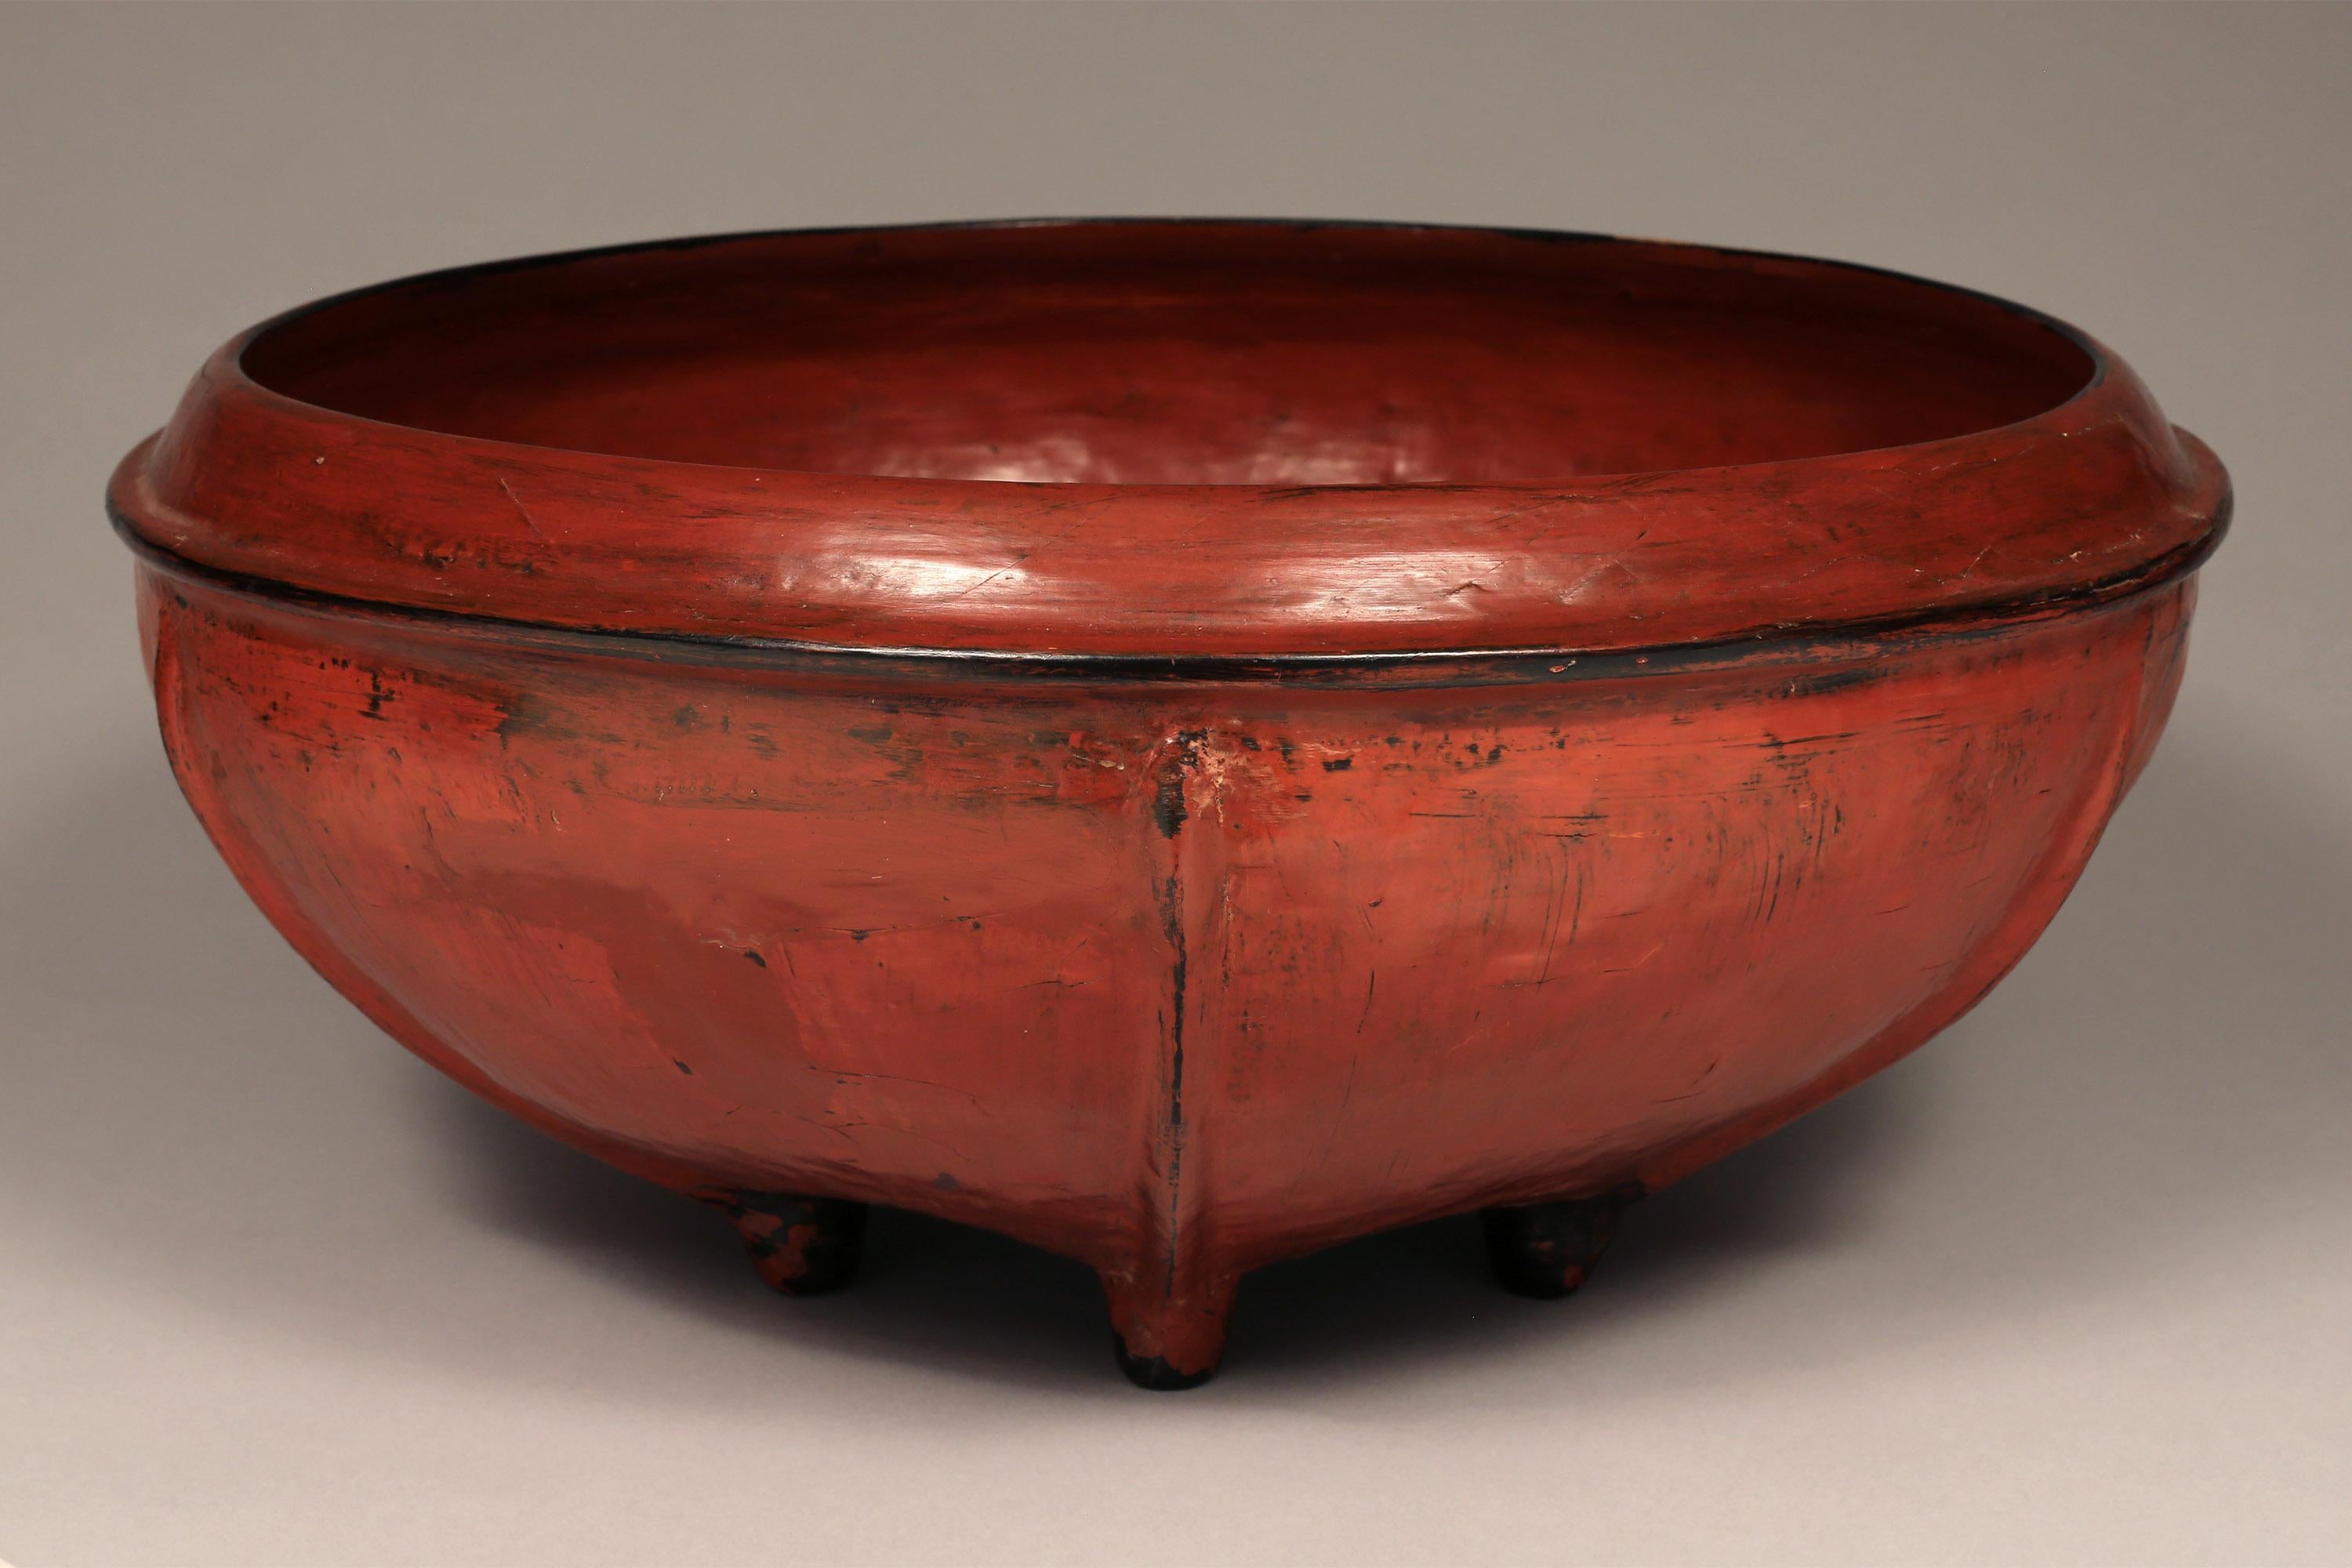 Burmese woven bamboo and red lacquered offering bowl, early 20th century

This lovely offering bowl features six ribs and six feet.
Woven bamboo is lacquered in layers - first black, then red achieving the distinctive look of Burmese lacquerware.